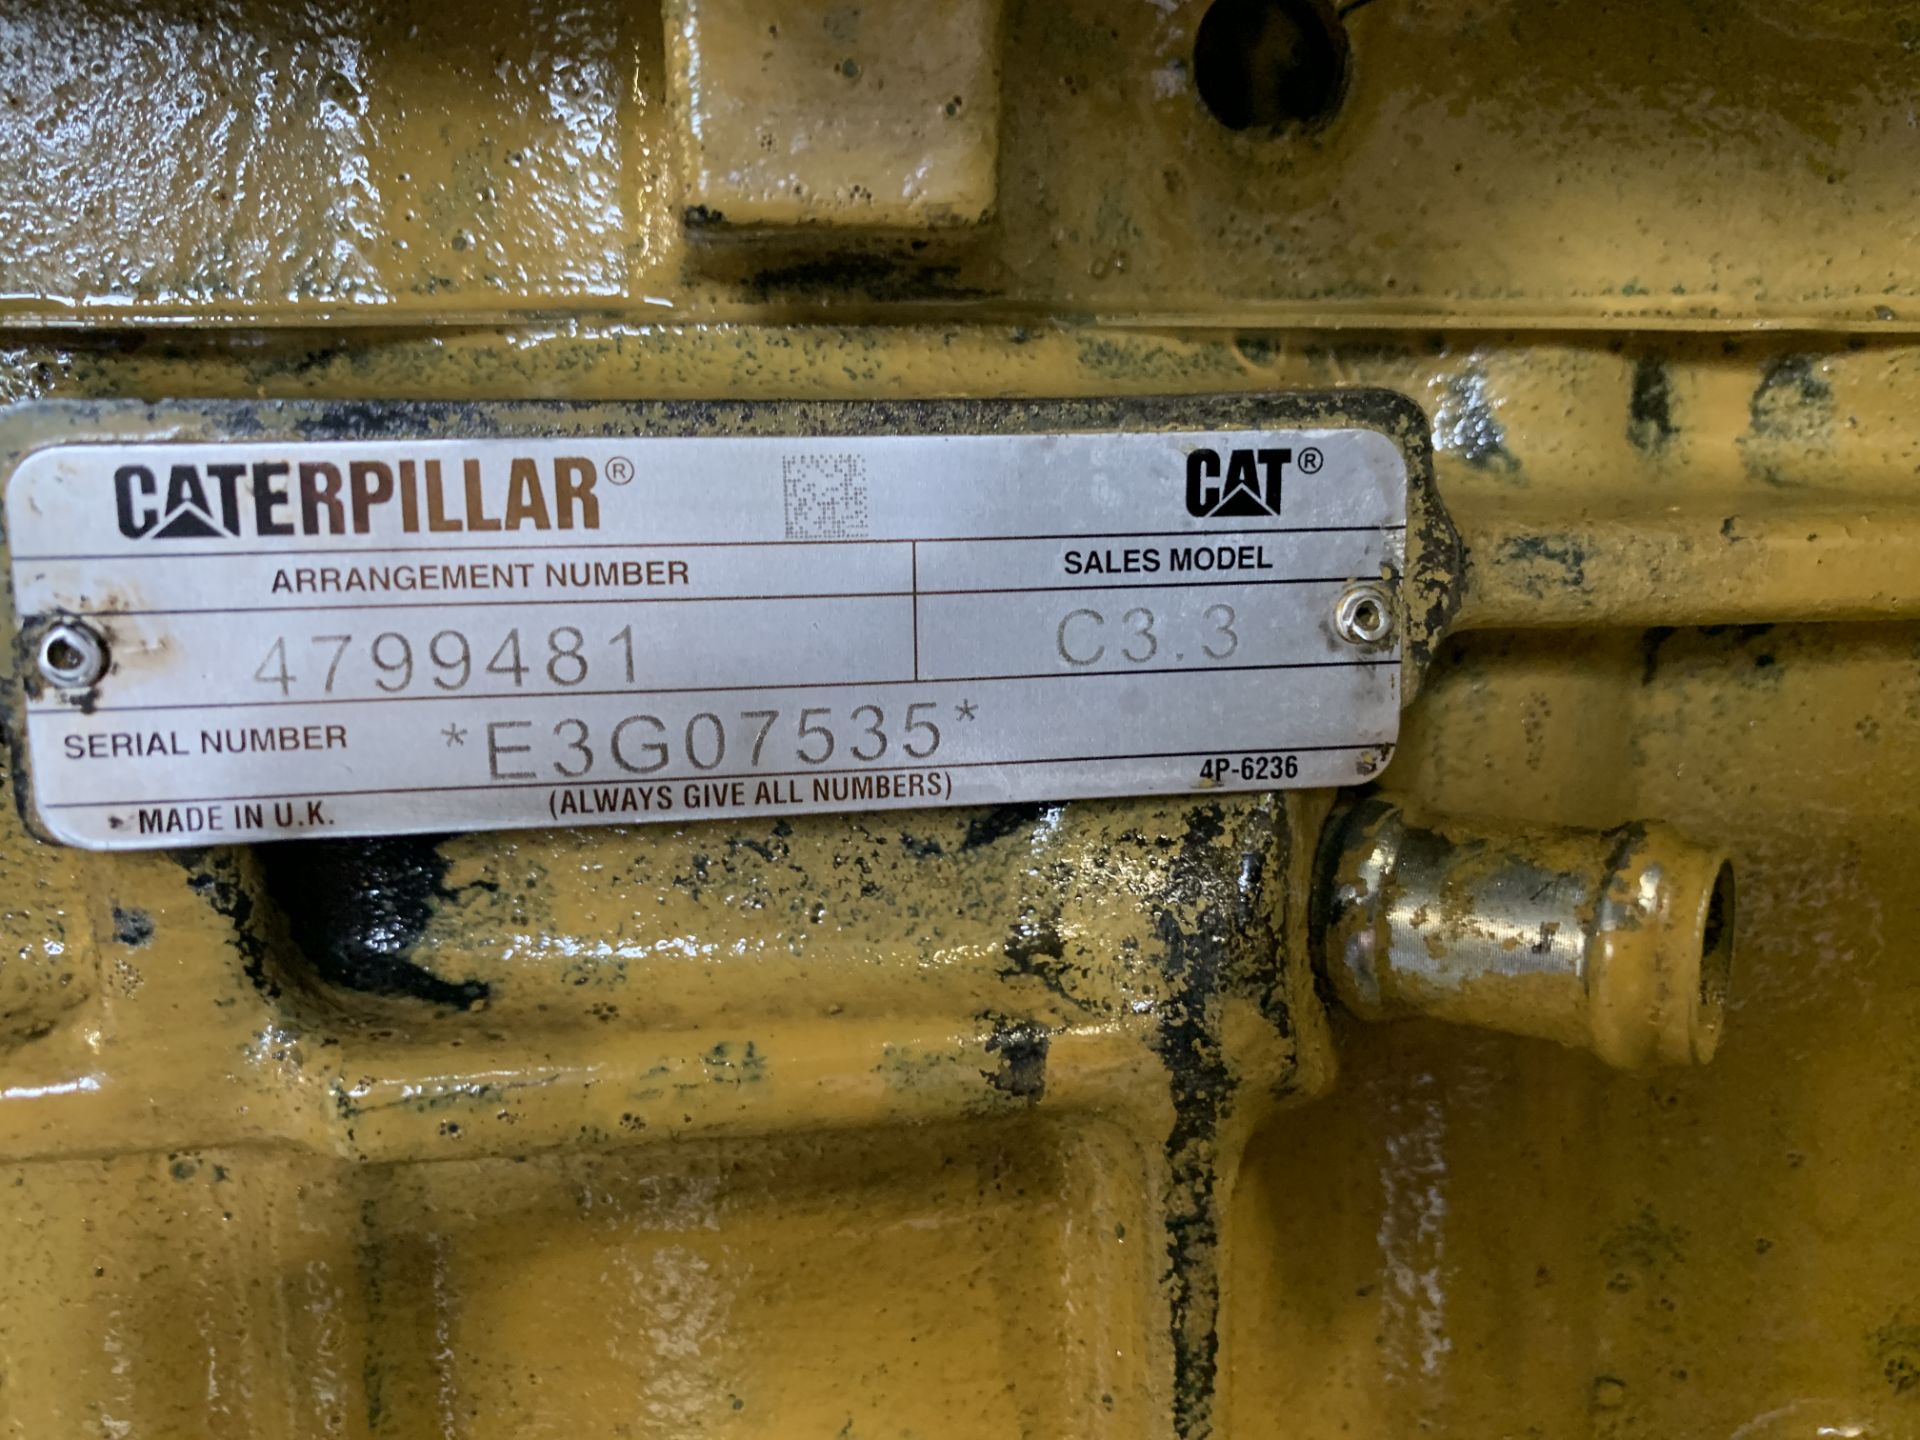 HT - CATEPILLAR S3.3 G4 G DRIVE GENERATOR, Serial Number:*E3G07535* RESERVE REDUCED!! *PLUS VAT* - Image 19 of 19